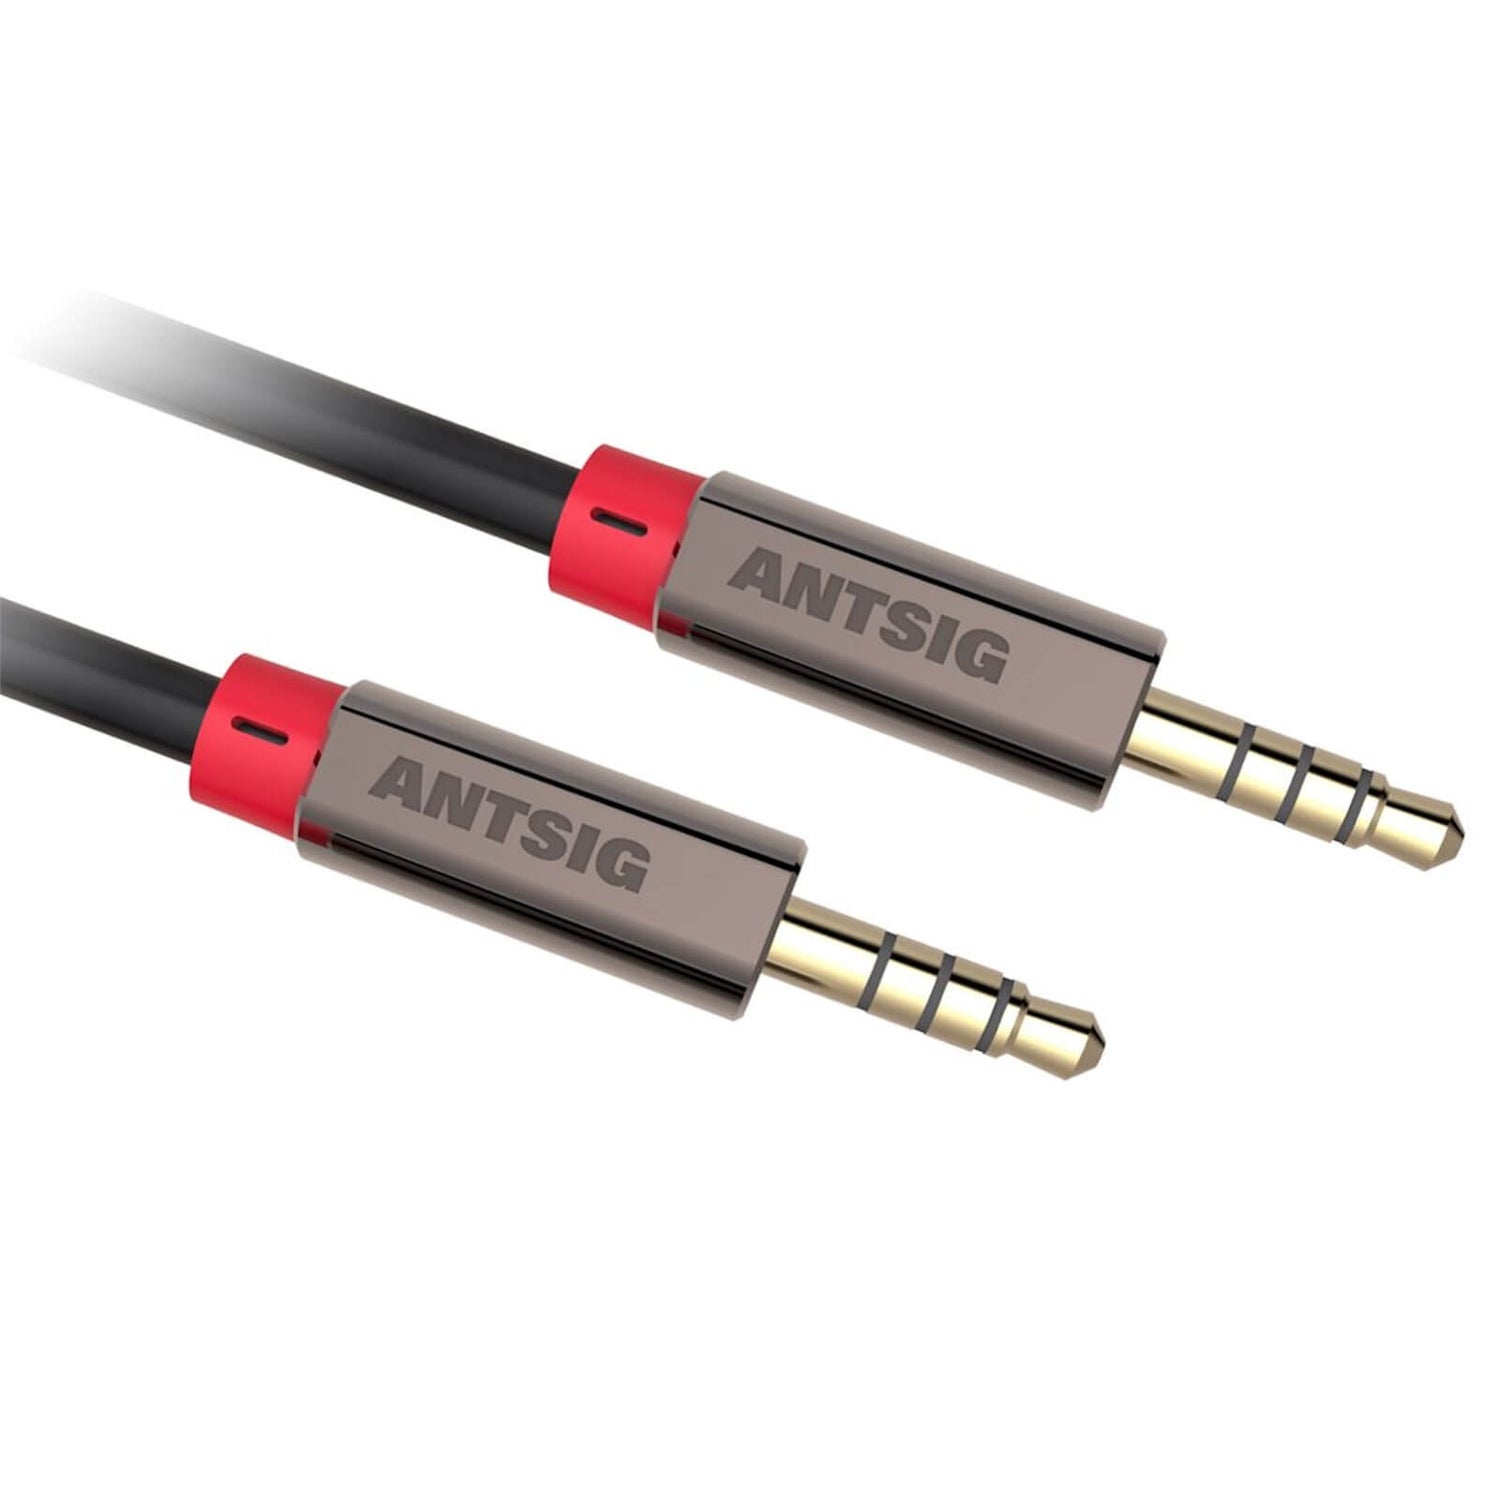 Antsig 3.5mm Male to Male Audio Cable 1.5m